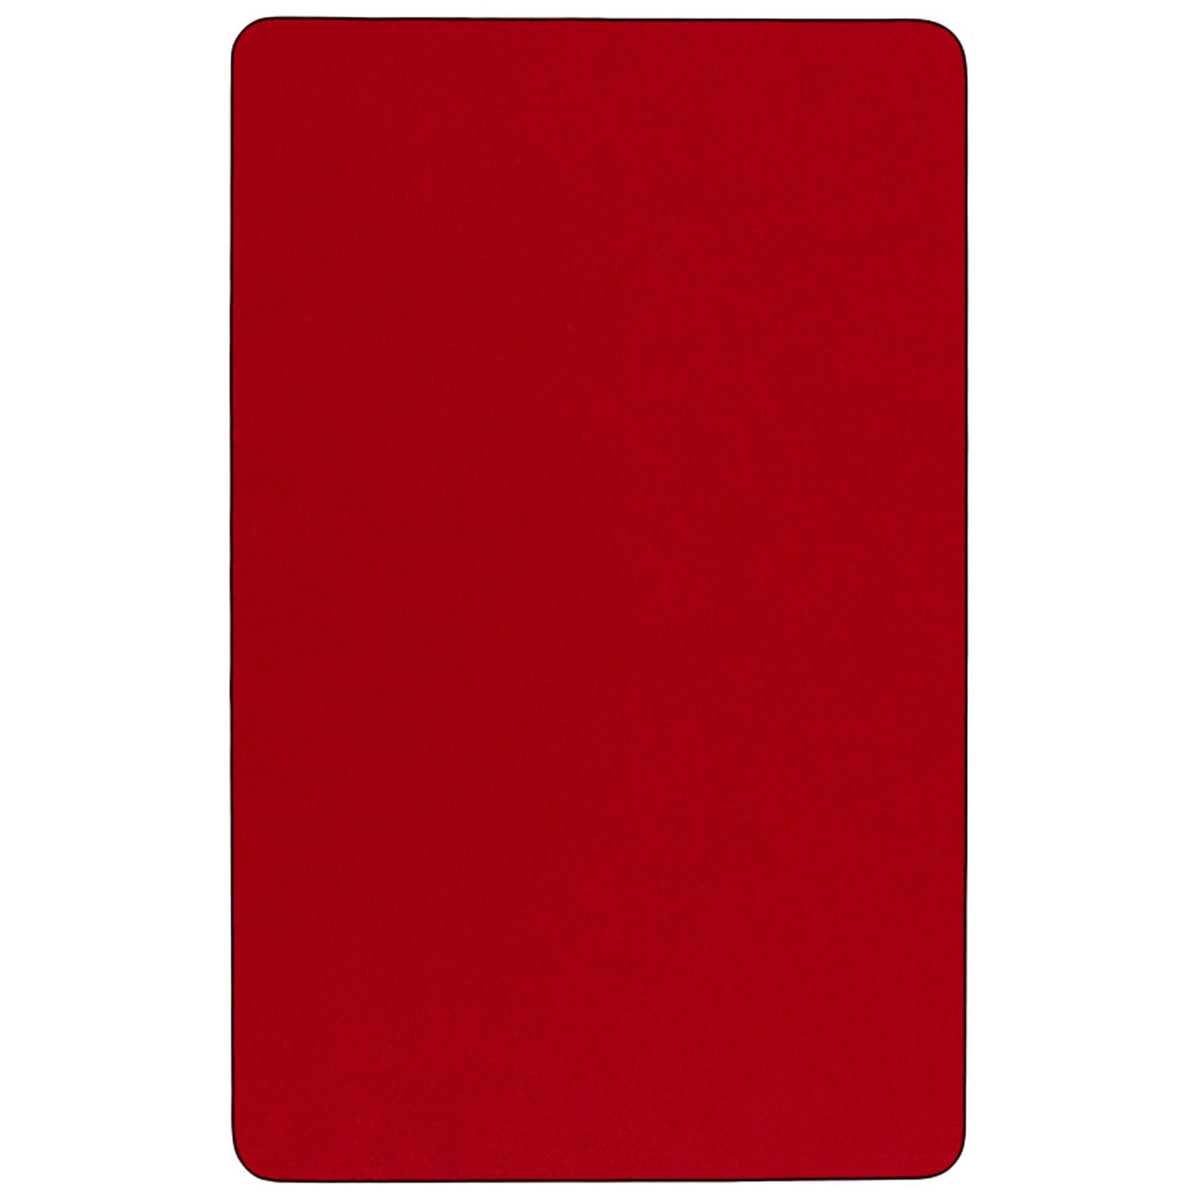 Red |#| Mobile 30inchW x 60inchL Rectangular Red Thermal Laminate Adjustable Activity Table